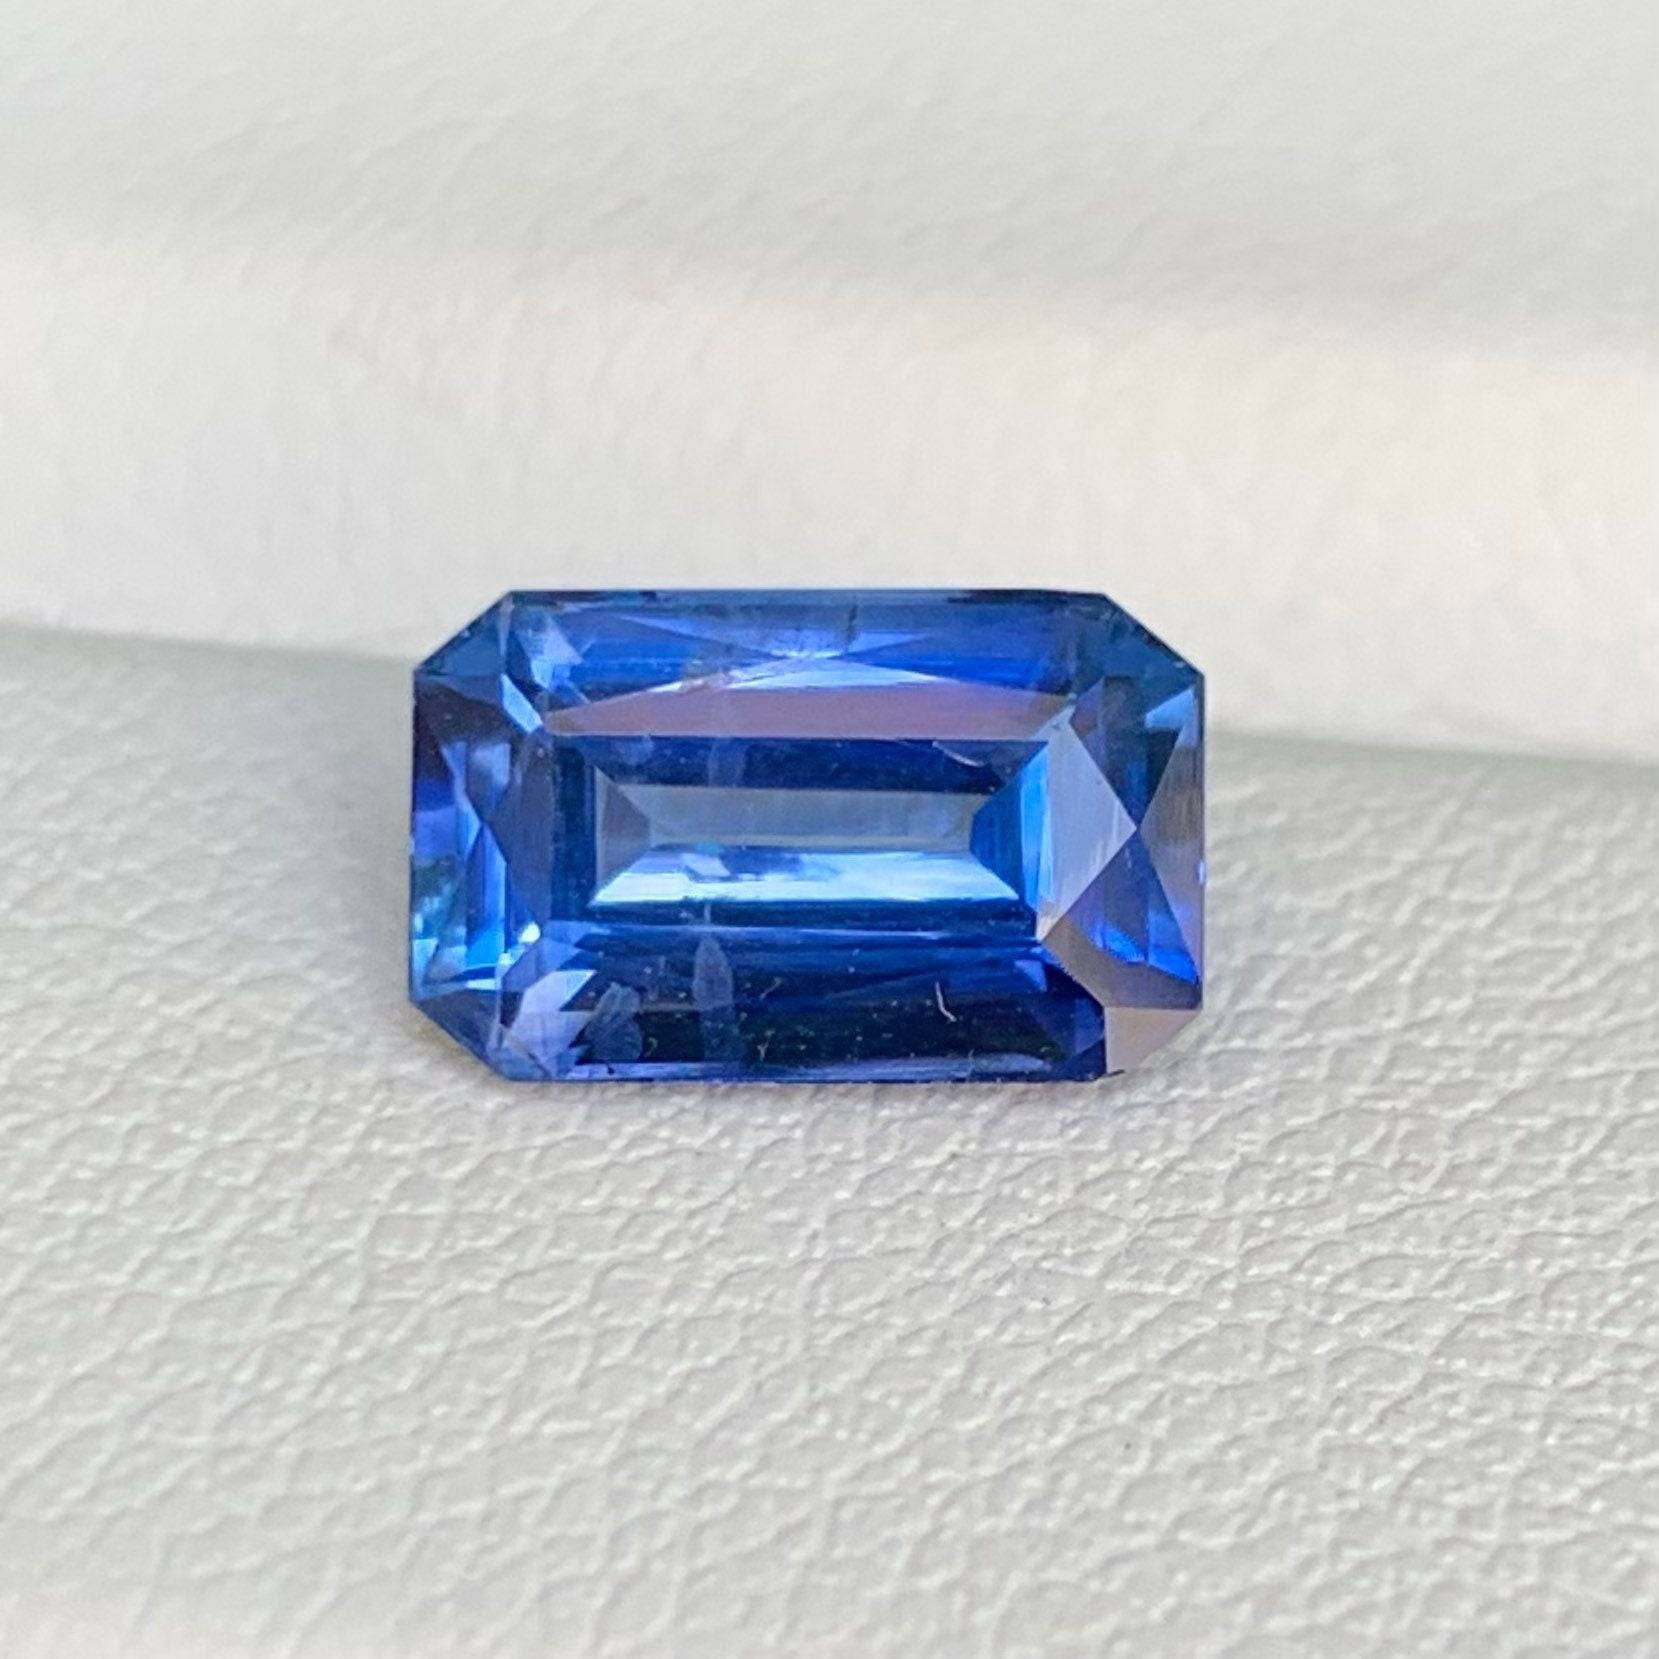 Blue sapphire 2.11 Cts, Natural Cornflower Blue Sapphire, Blue sapphire for Engagement ring, Ceylon Blue Sapphire, A Gift for her - Baza Boutique 